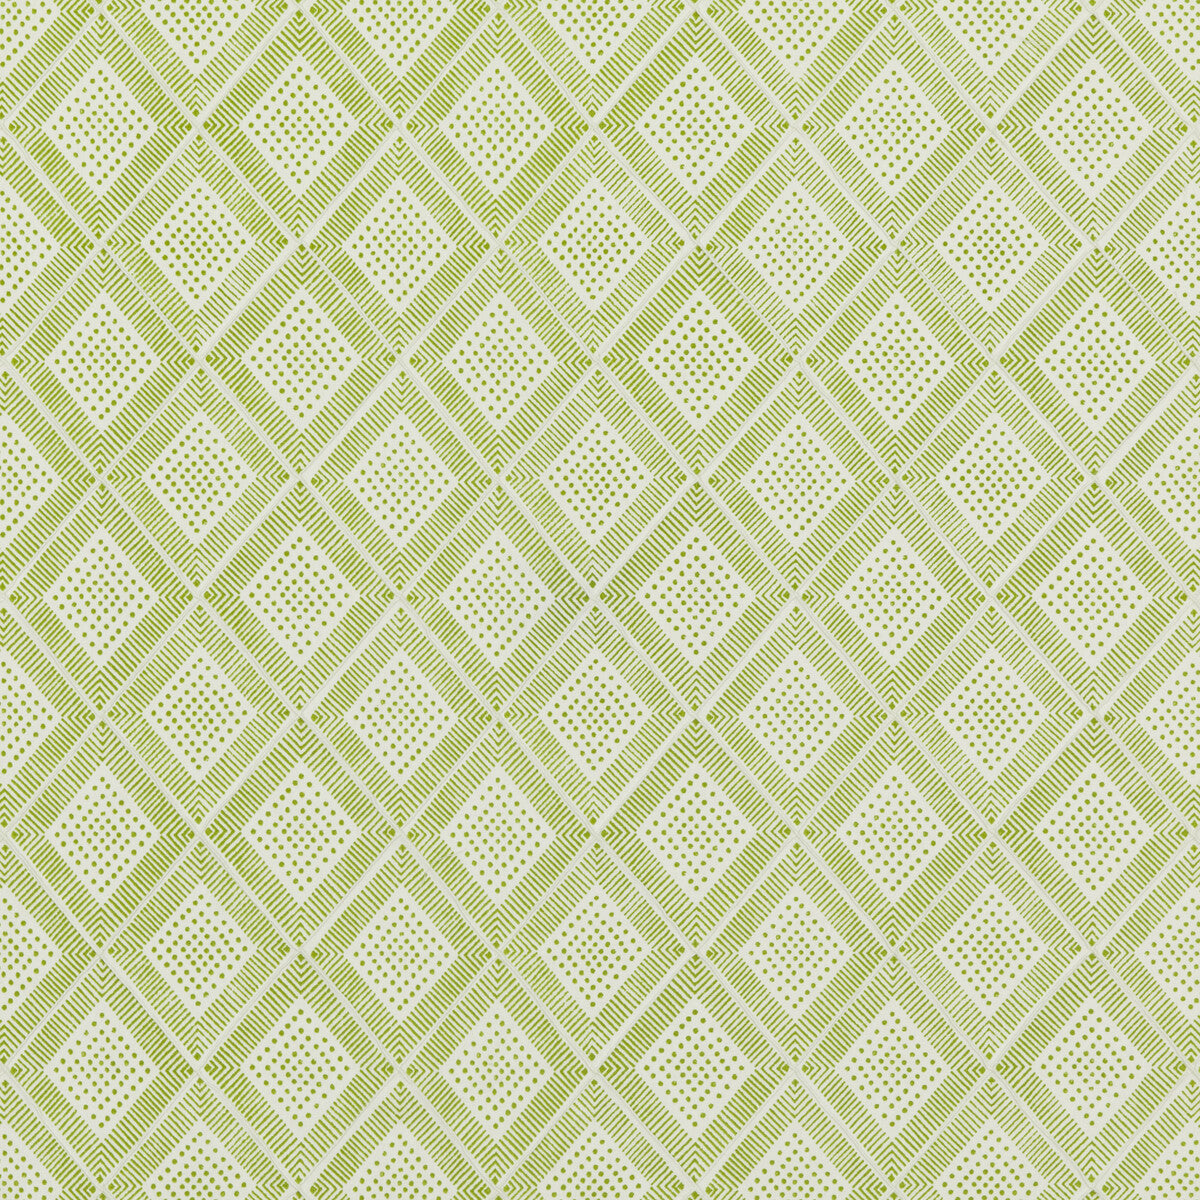 Block Trellis fabric in green color - pattern PP50484.5.0 - by Baker Lifestyle in the Block Party collection